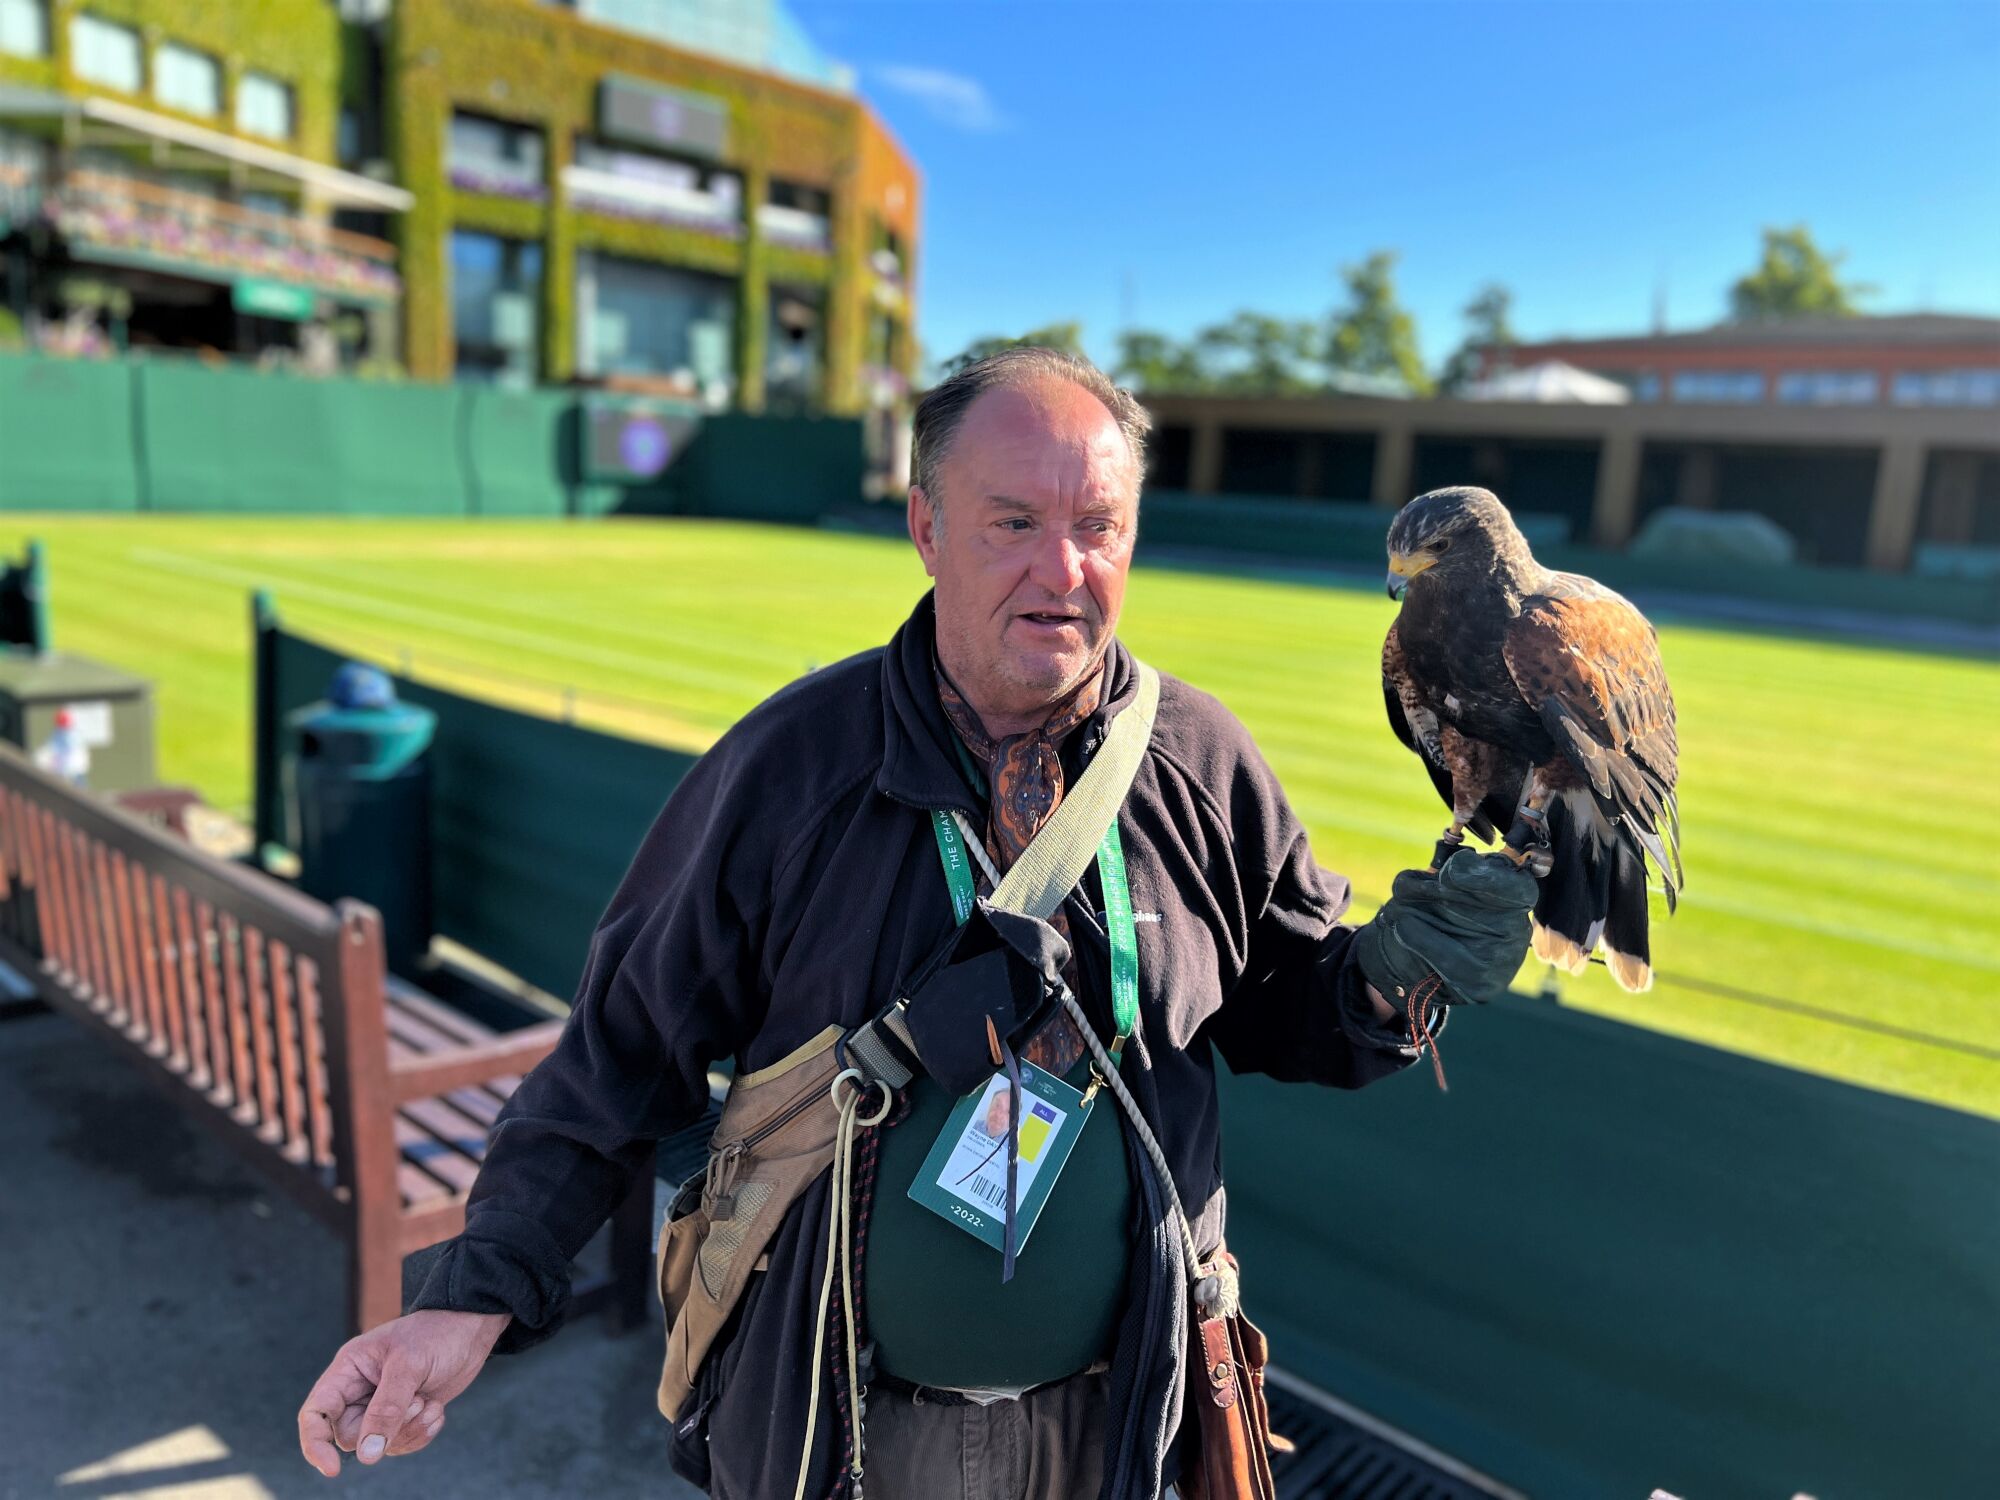 Wayne Davis strolls with Rufus around an outer court at the All England Lawn Tennis & Croquet Club.